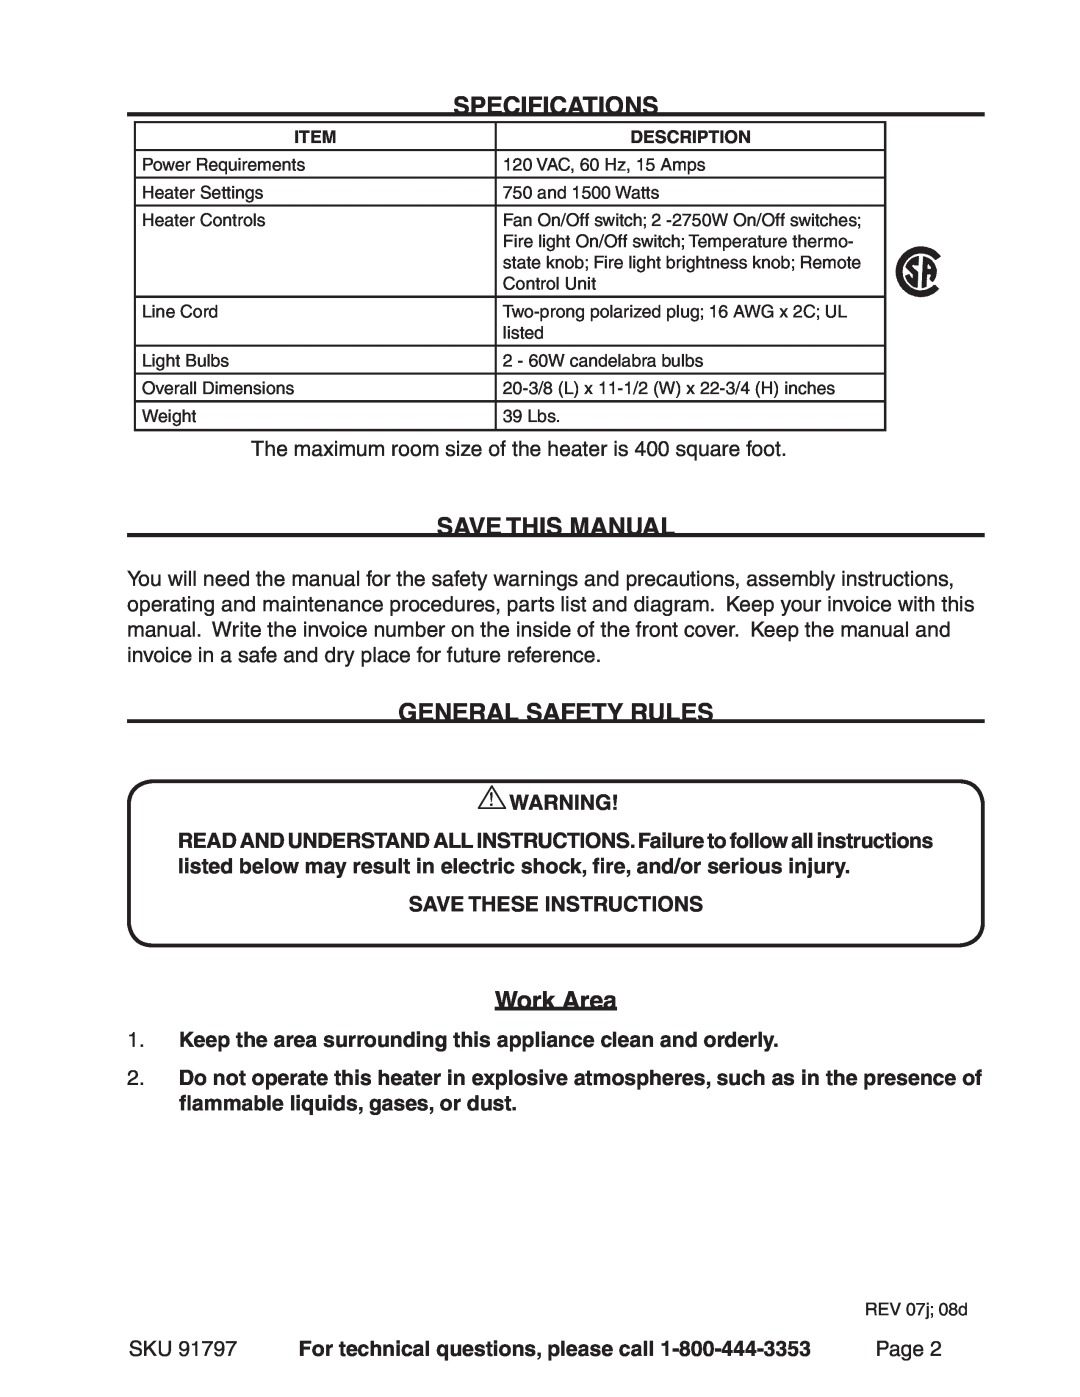 Chicago Electric 91797 manual Specifications, Save This Manual, General Safety Rules, Work Area, Save These Instructions 